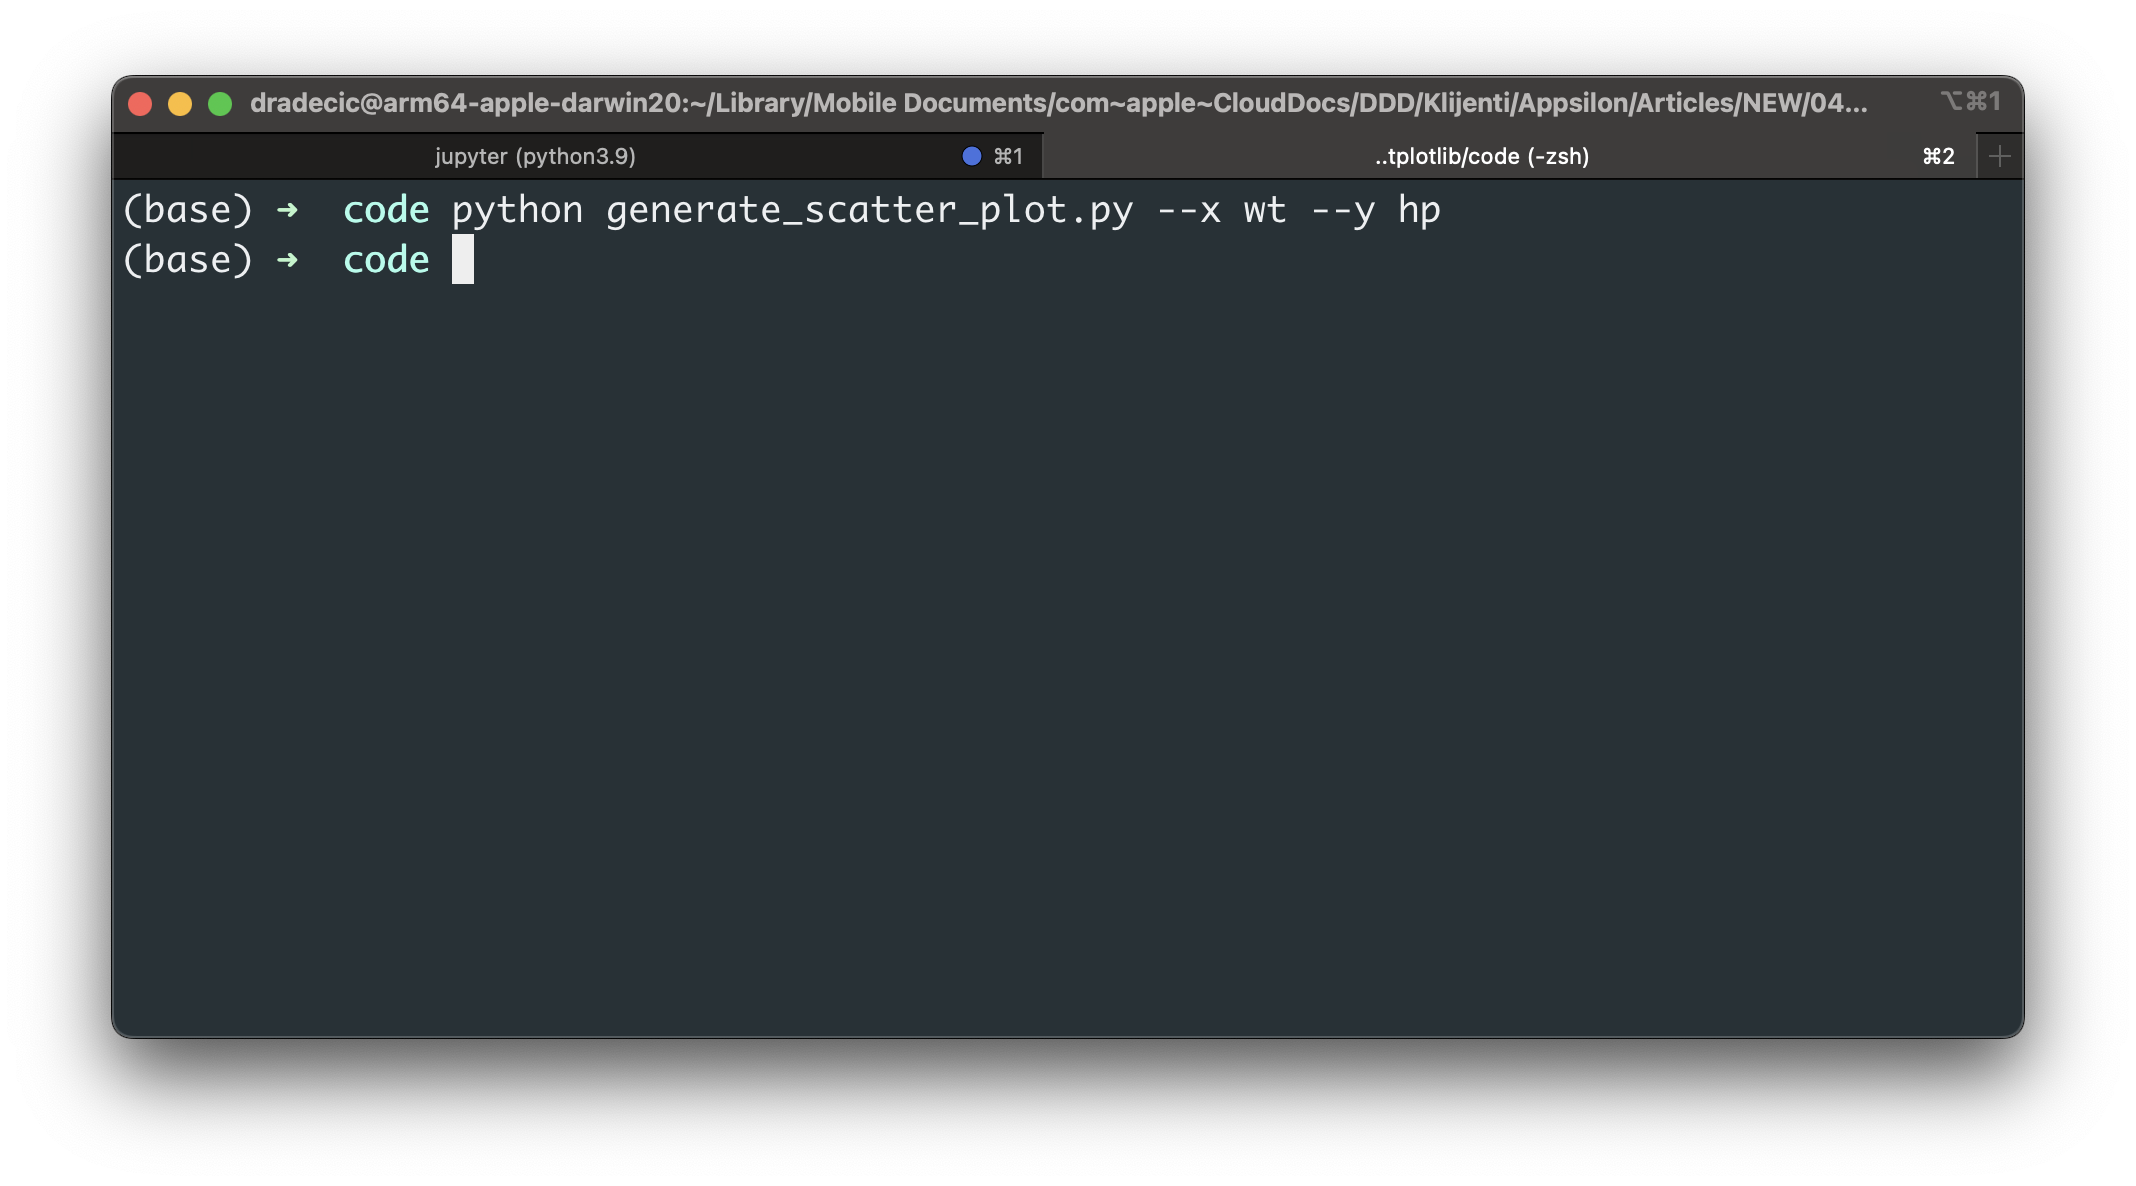 Image 6 - Running a Python script for chart generation